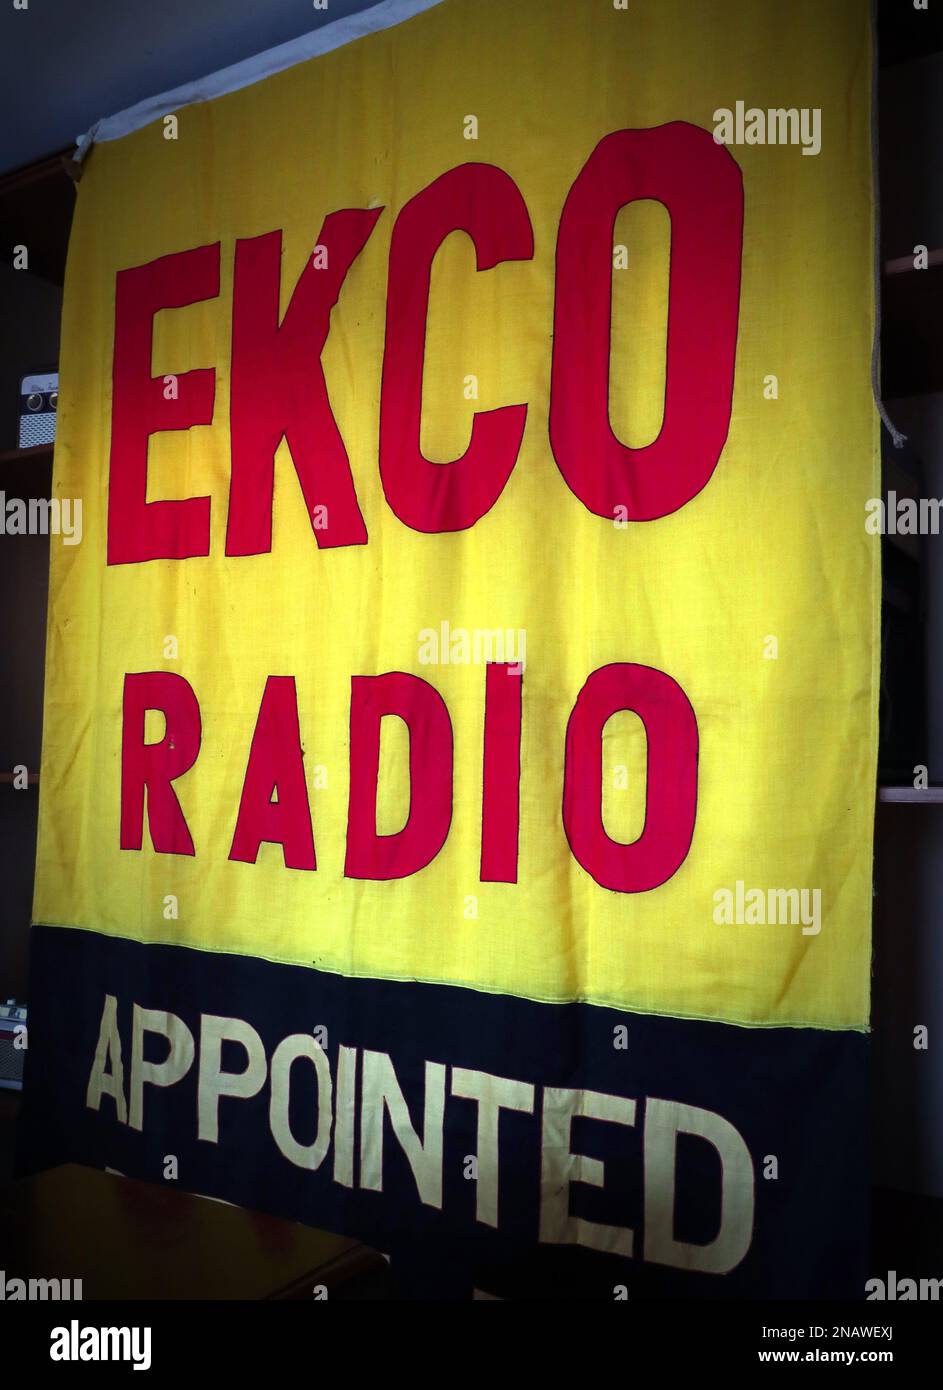 Red & Yellow, EKCO Radio, Appointed dealer flag, from 1960s, 1950s Stock Photo